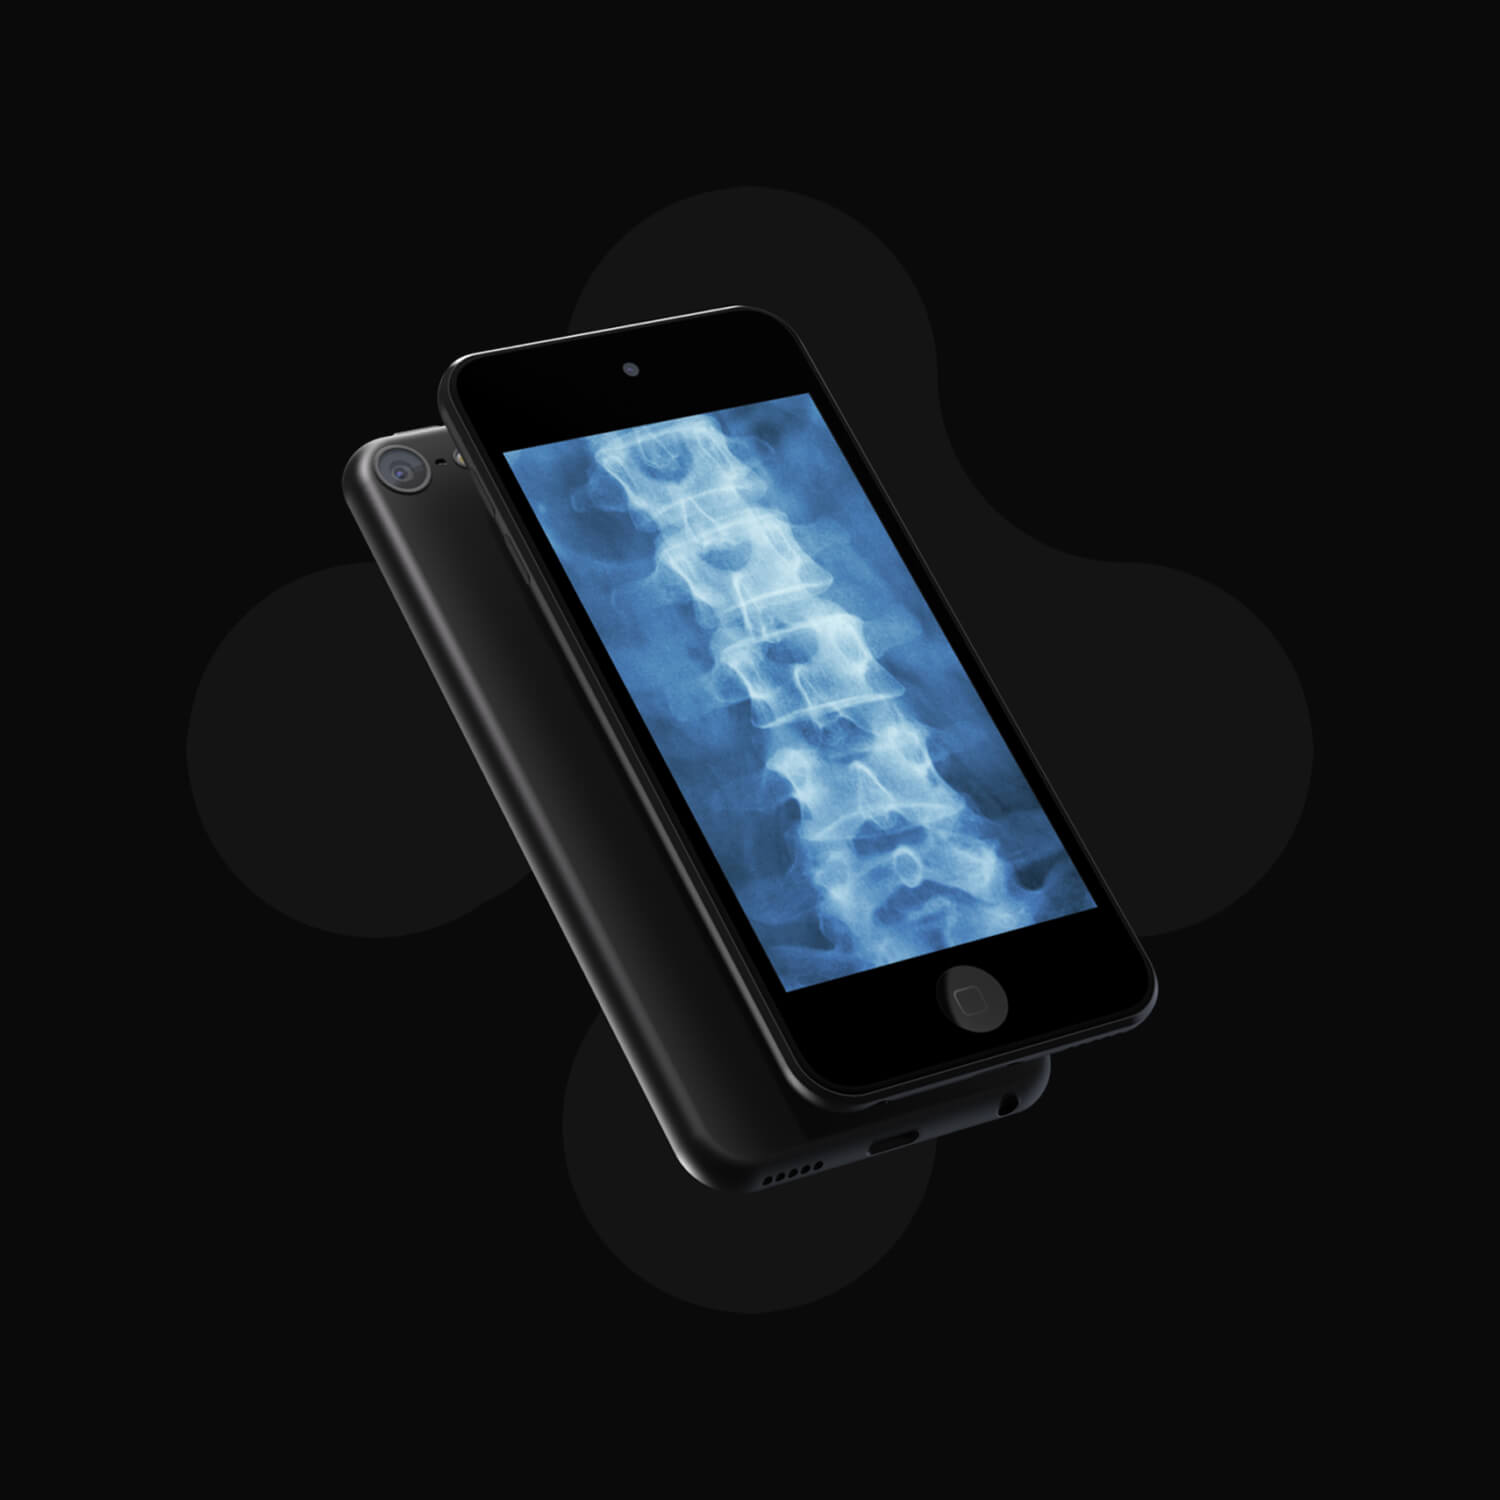 4th generation ipod touch displaying an x-ray image of a spine